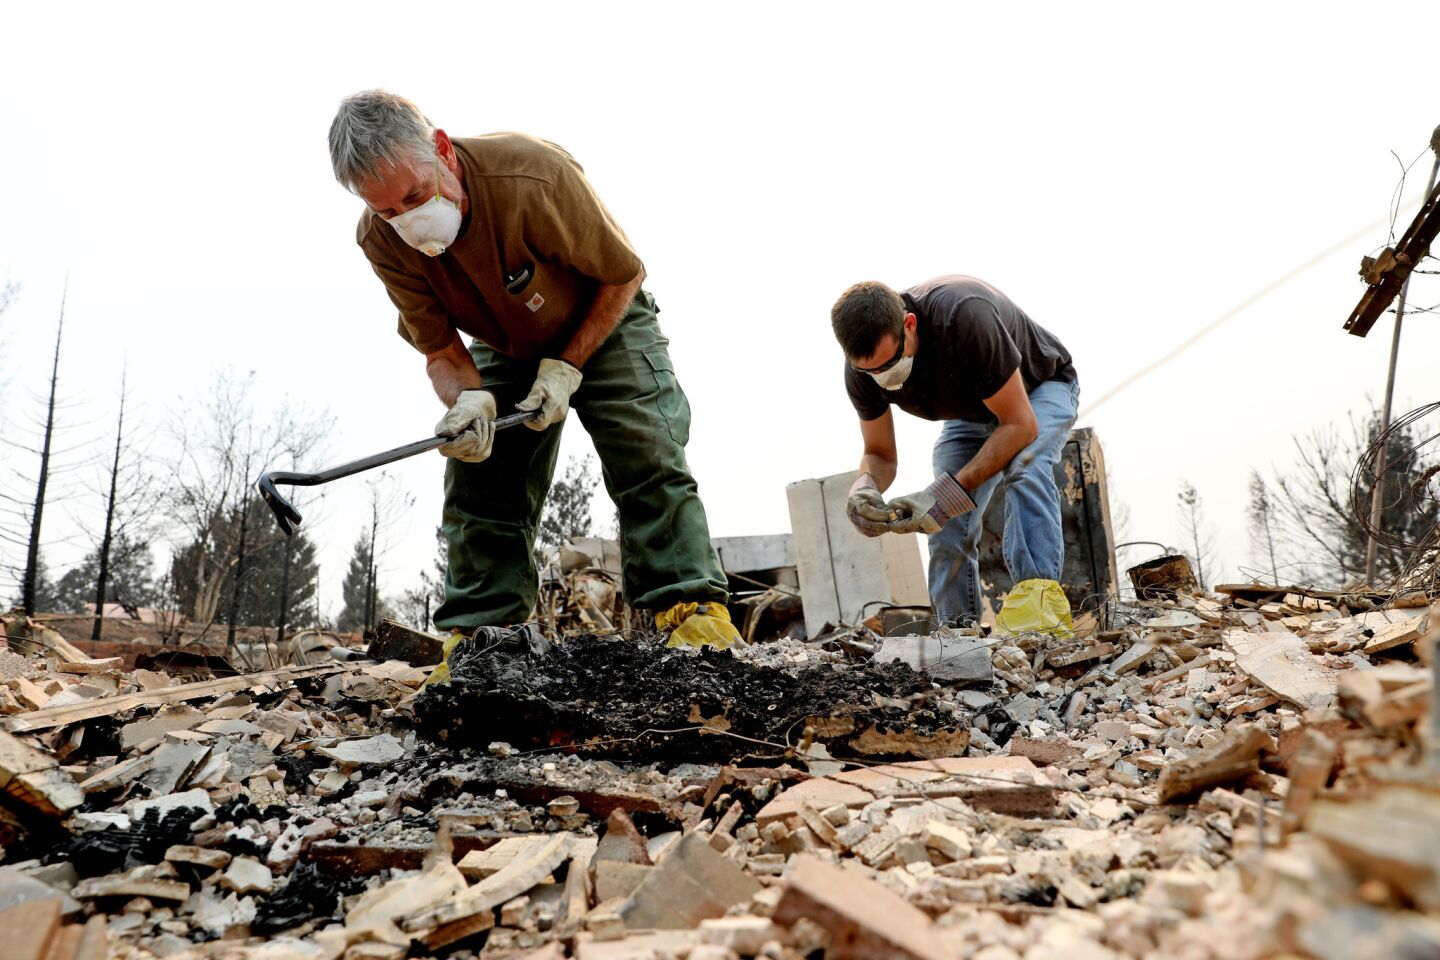 Dan Kissick, 60, left, shown with his son Jeff Kissick, searches the remains of his home on Kellinger Street on Saturday after the Carr fire hit Redding.